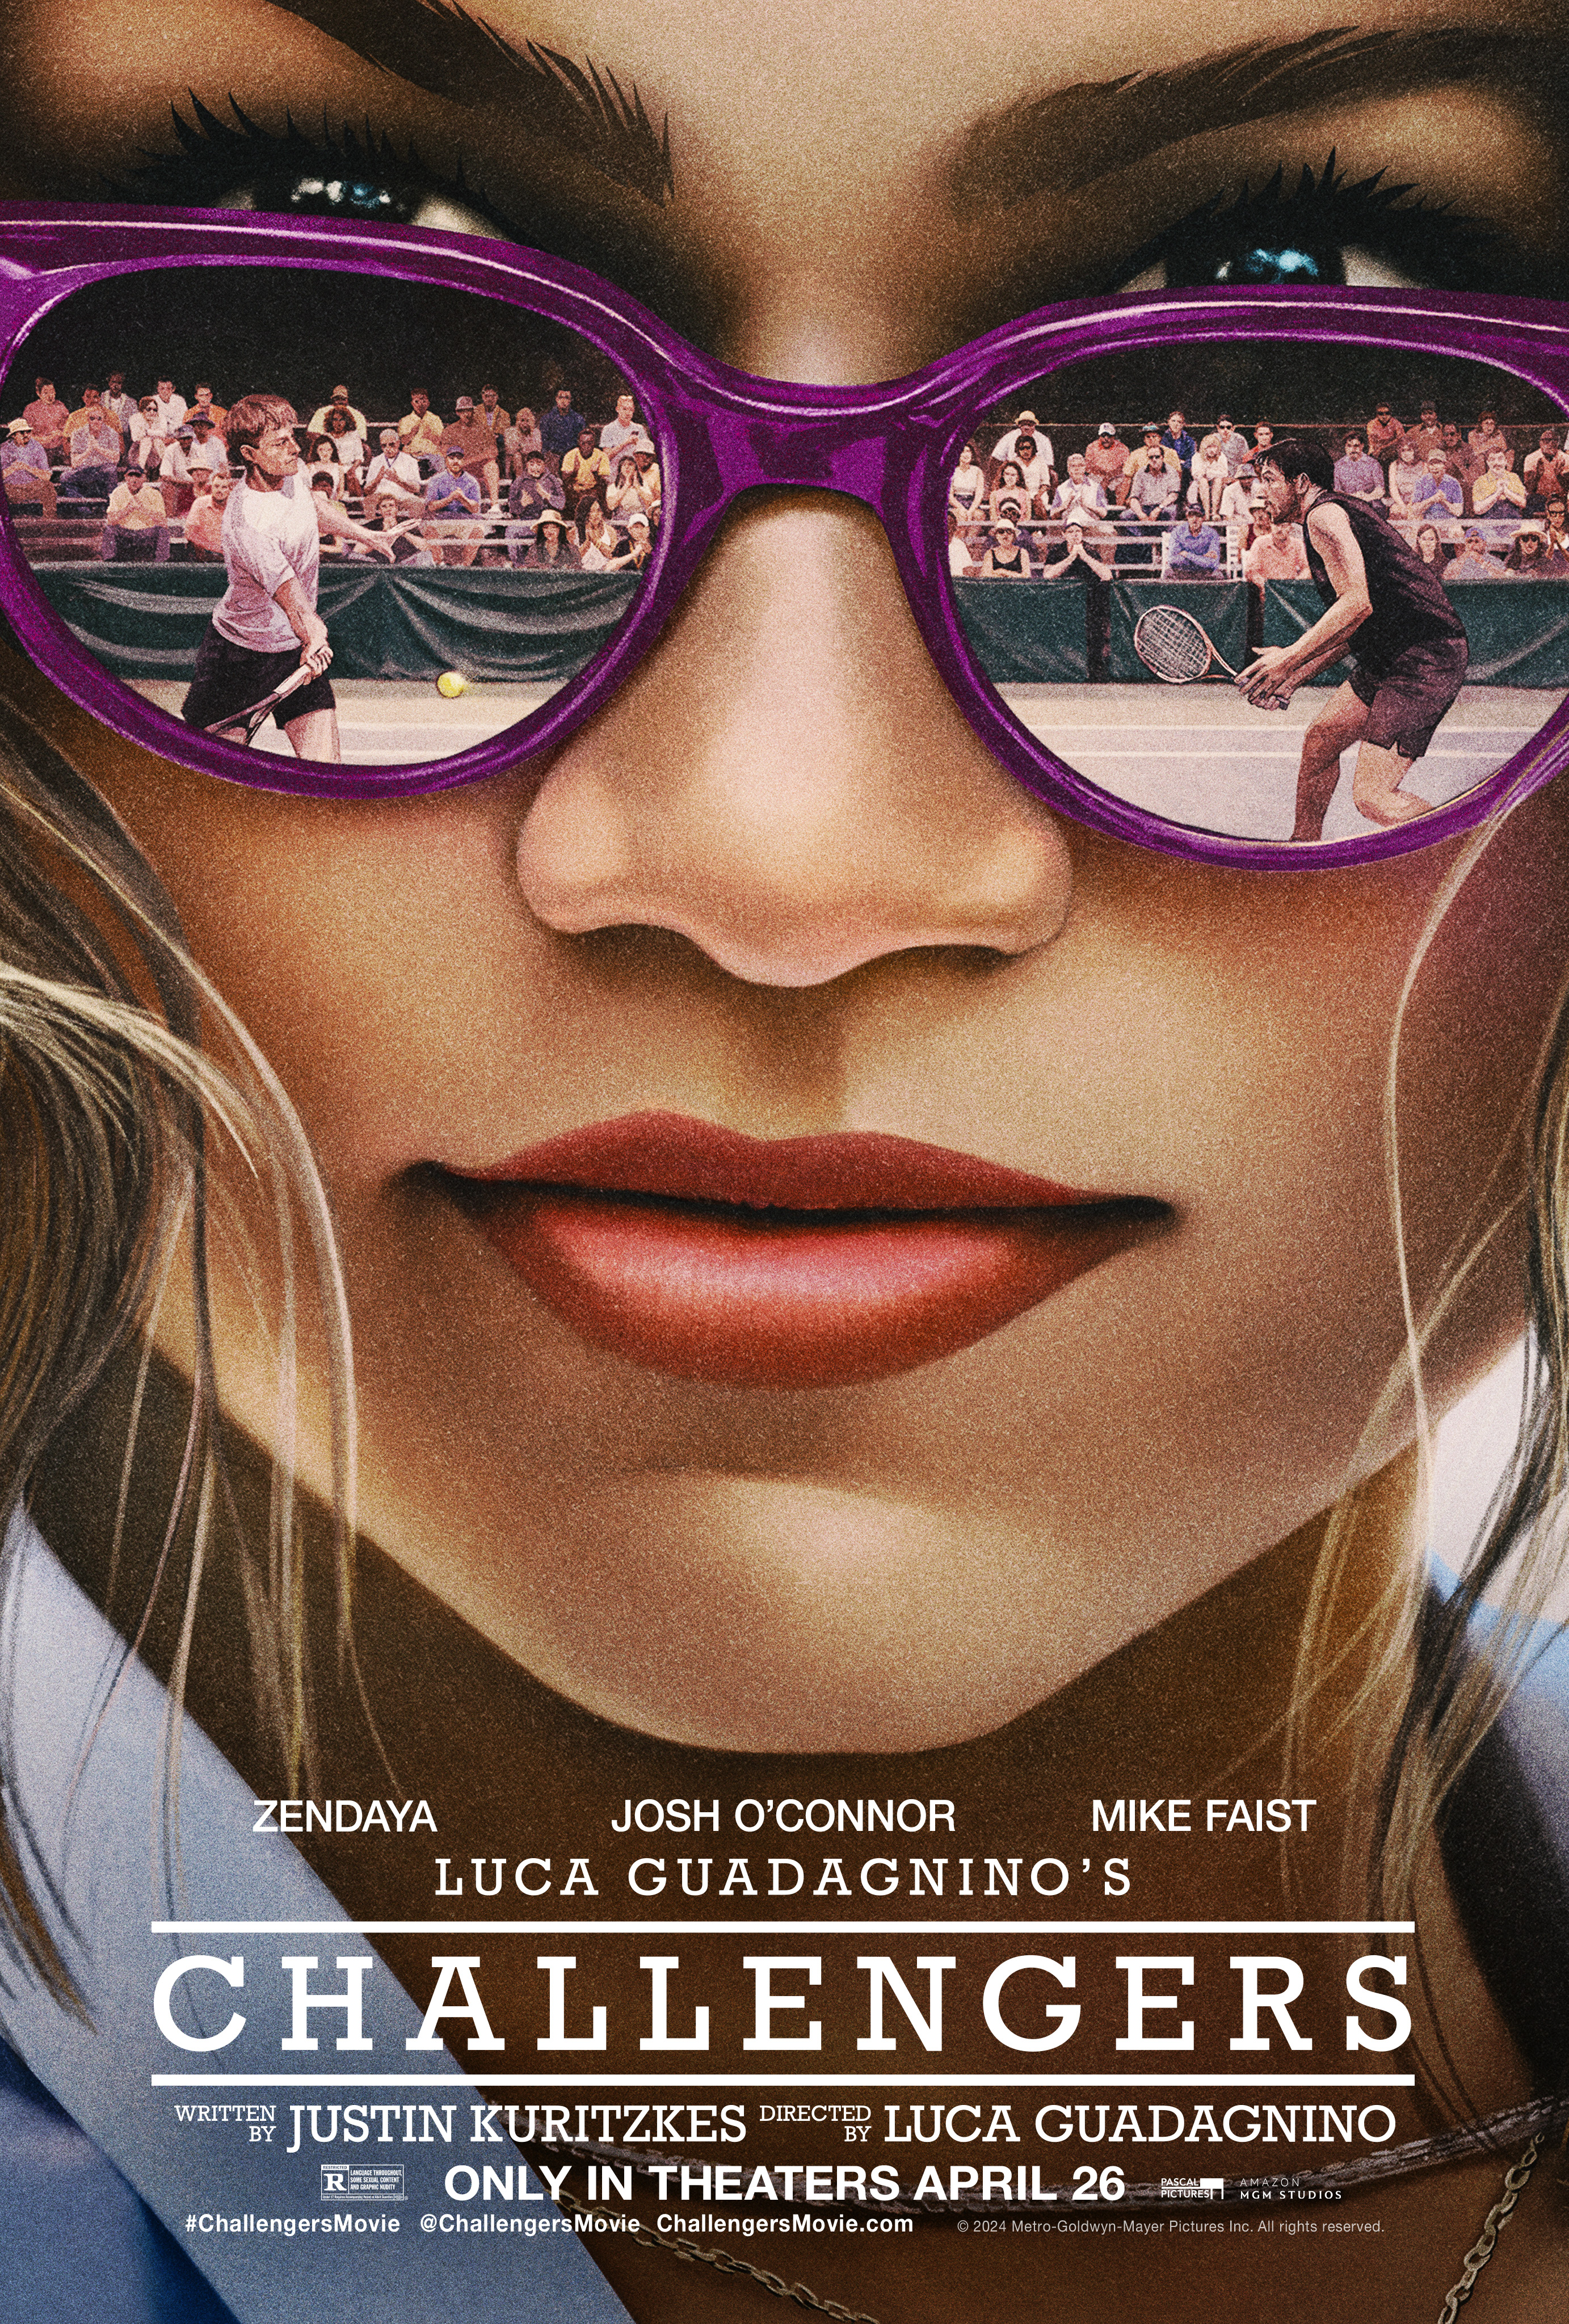 An artistic rendering of Zendaya with reflective sunglasses. In the sunglasses' reflection are two men playing tennis. "CHALLENGERS" reads in white text at the bottom.